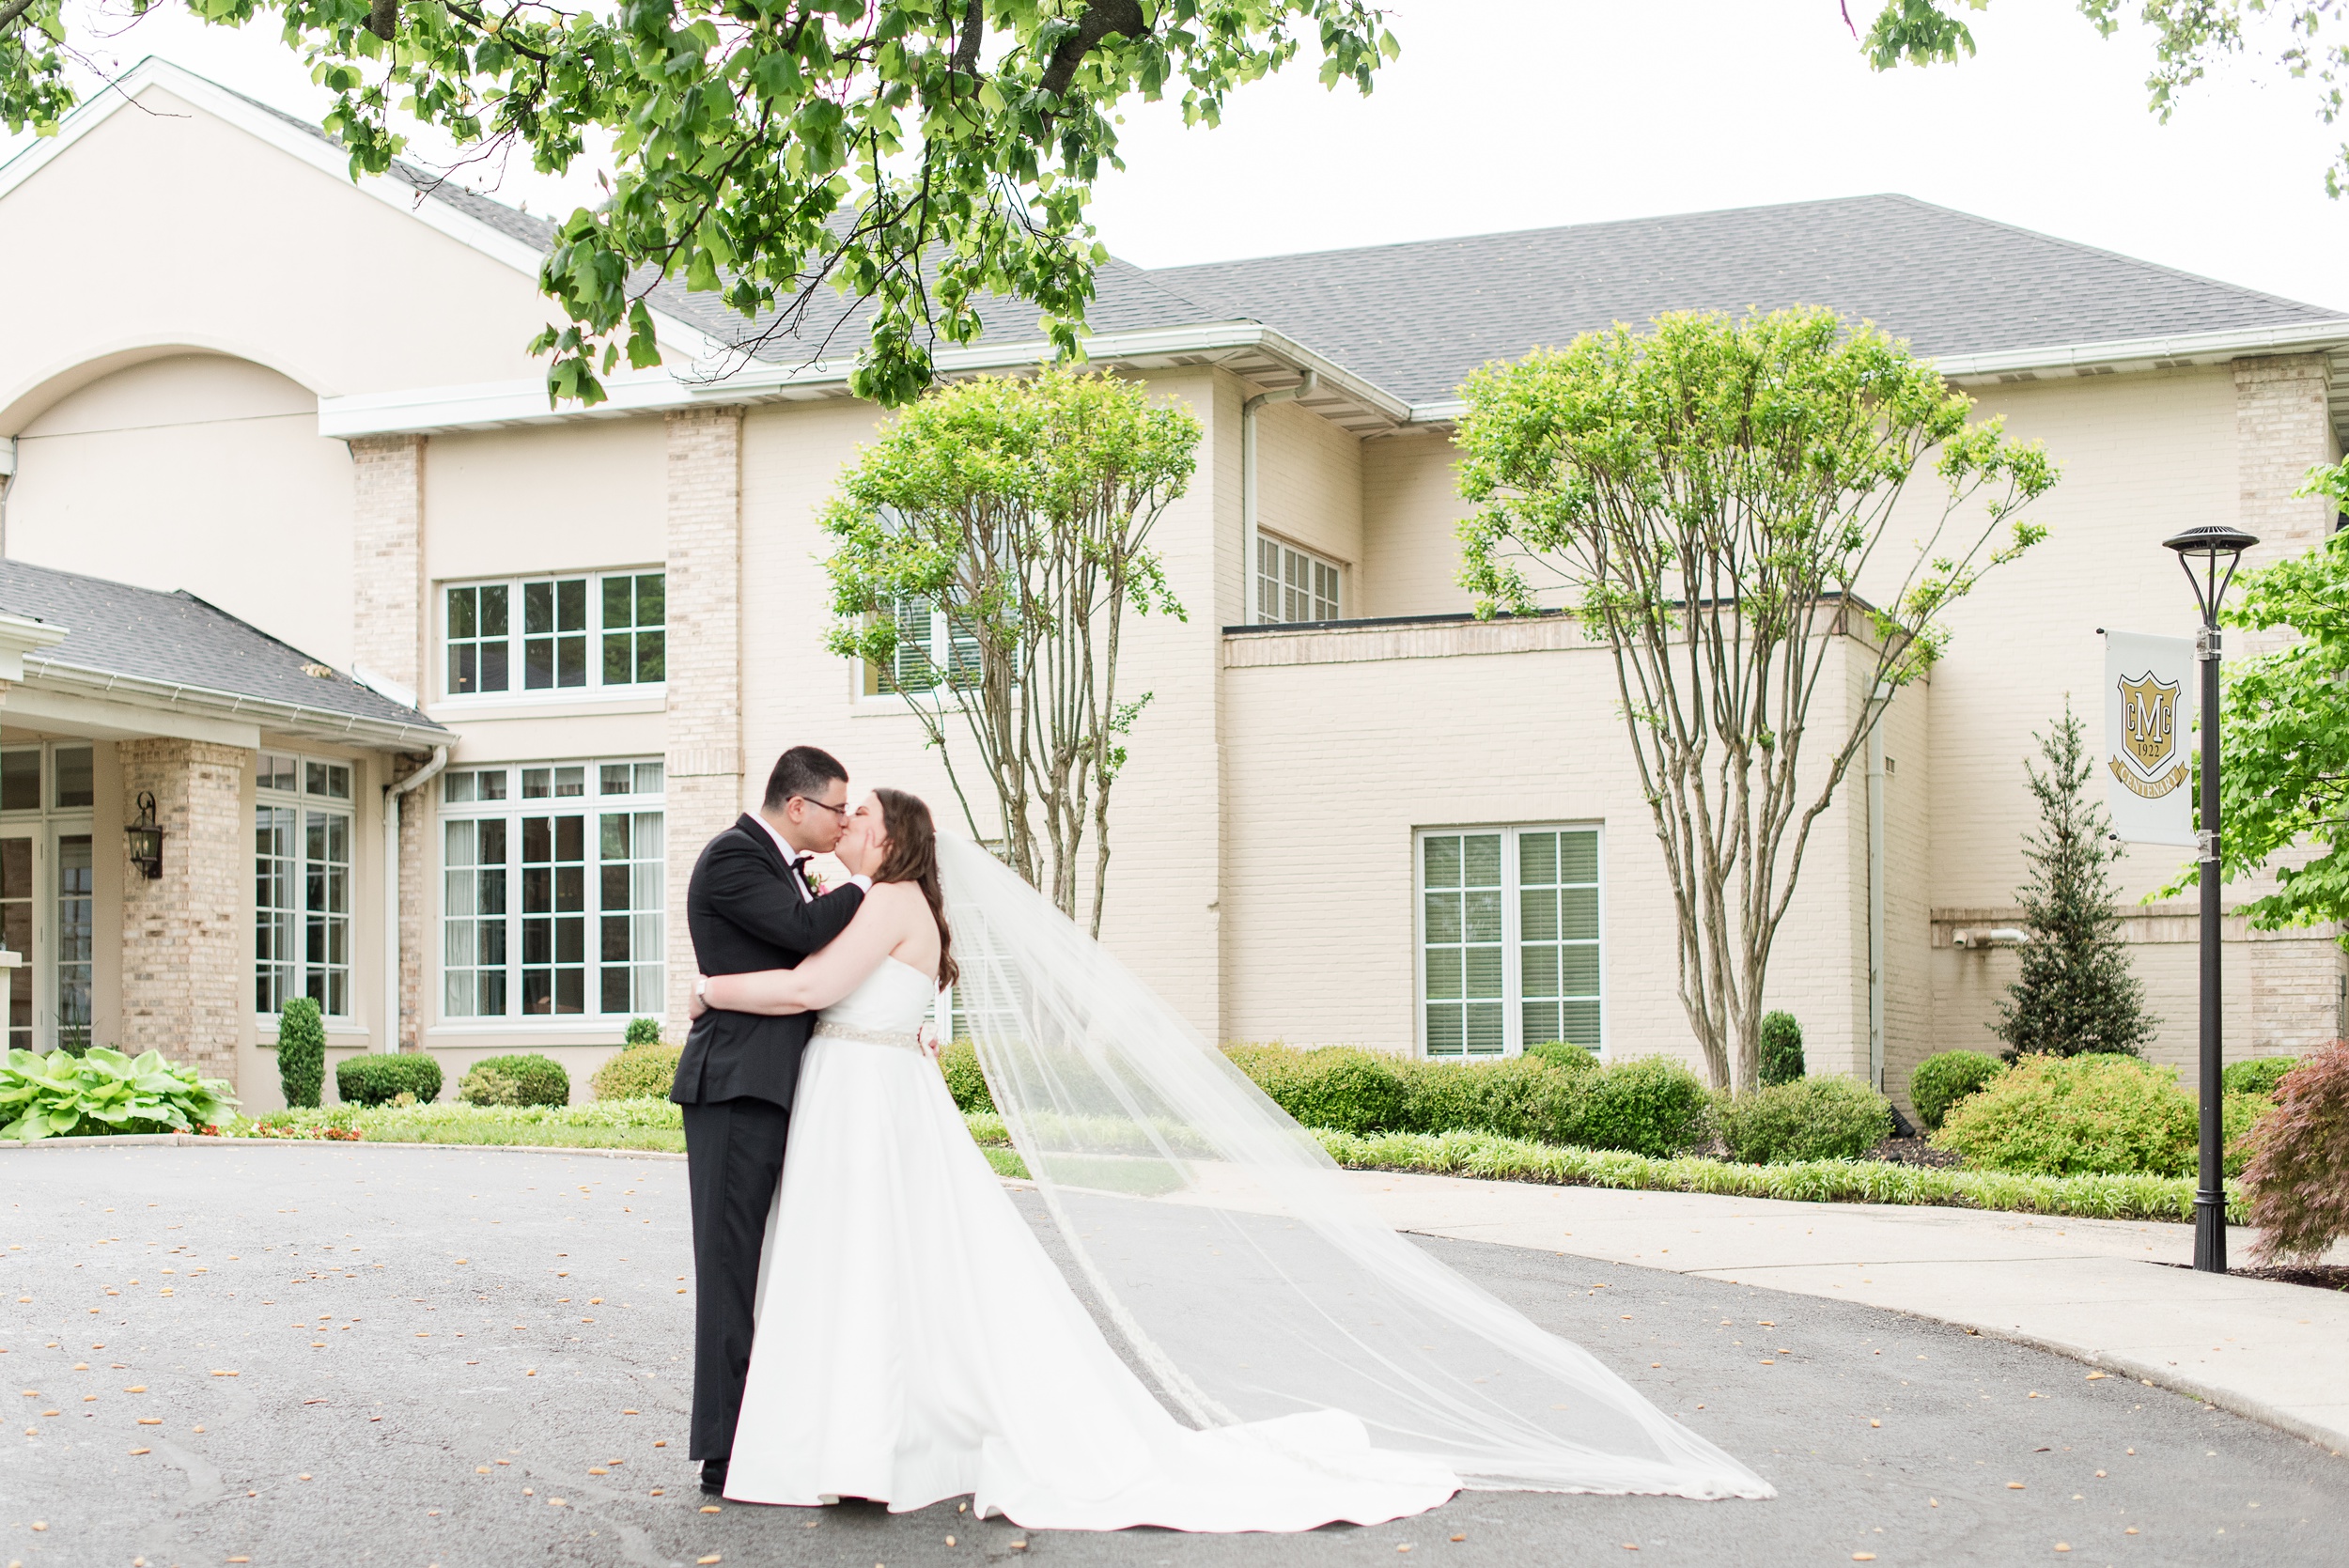 Newlyweds kiss while the veil blows in the wind in the driveway of their Manor Country Club Wedding